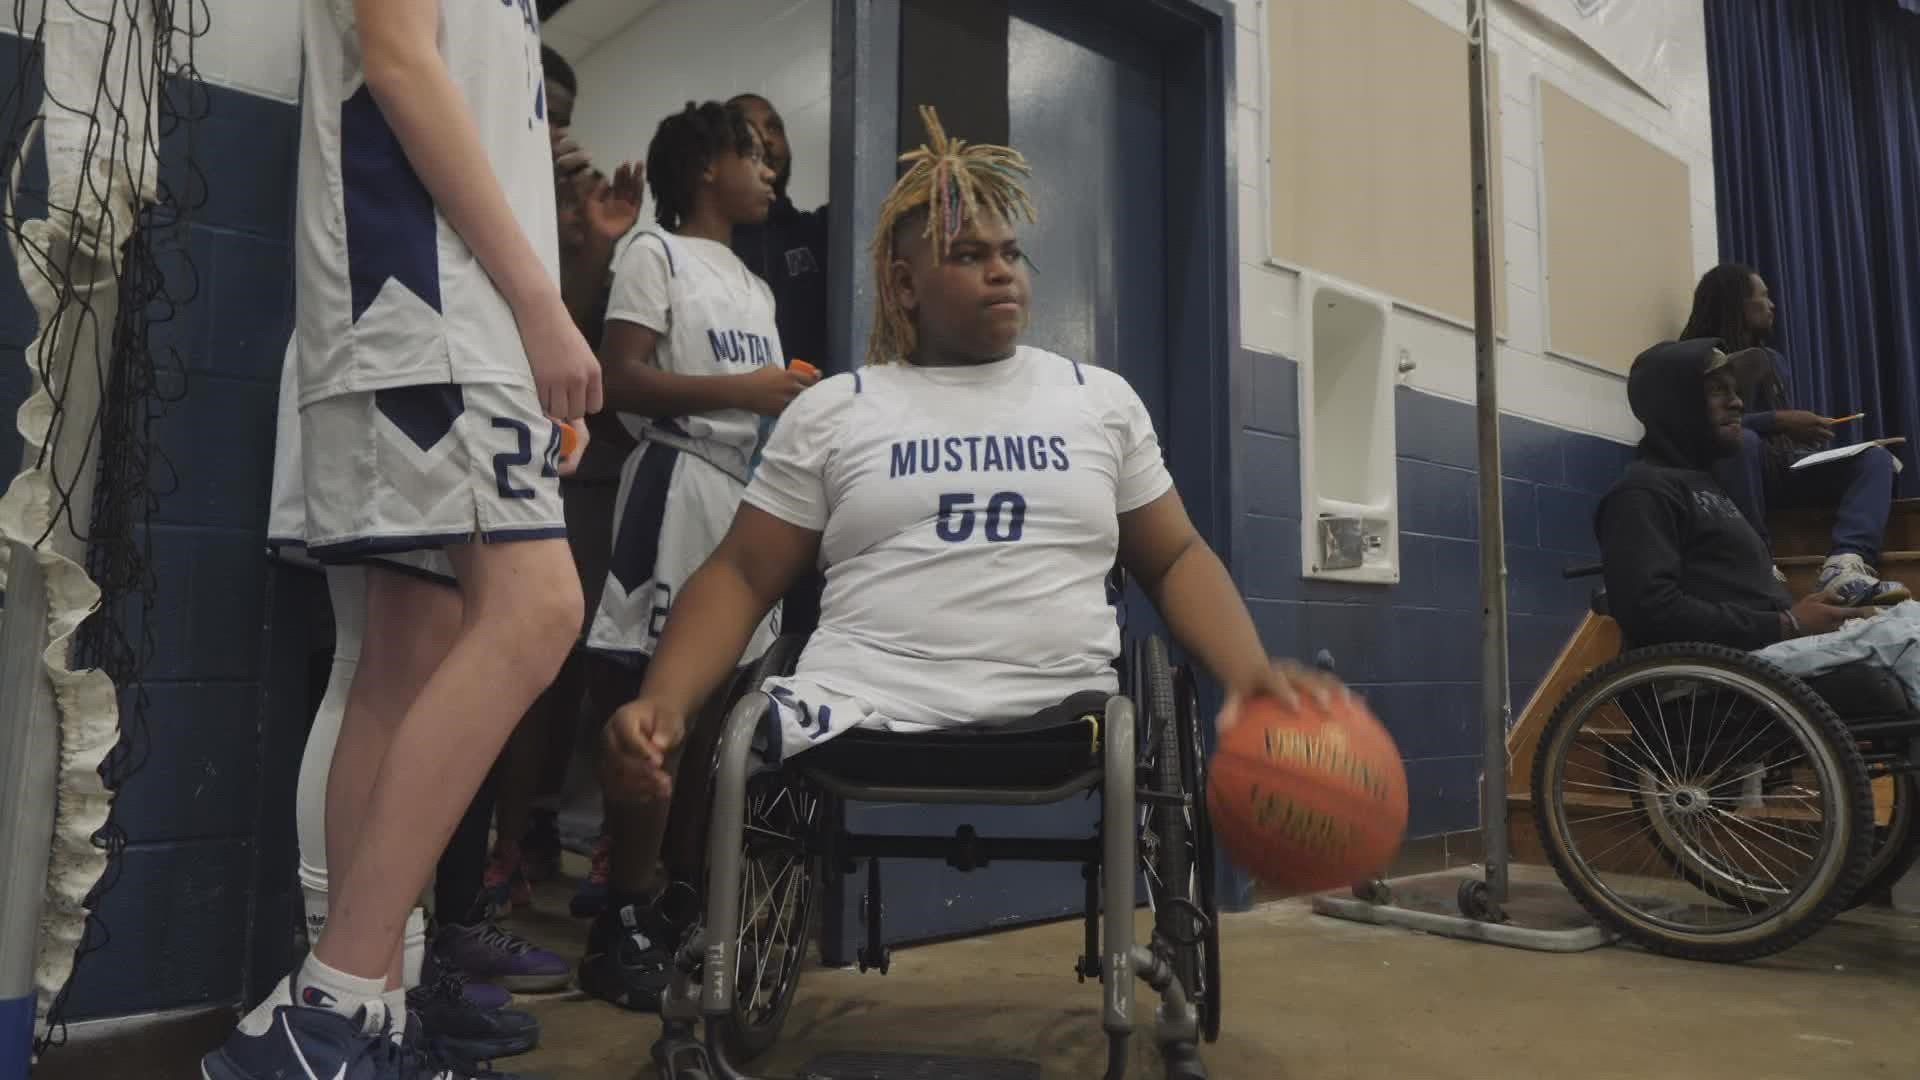 Josiah Jones says when he's on the basketball court, he's just one of the teammates. This is despite the fact that he was born with no legs.